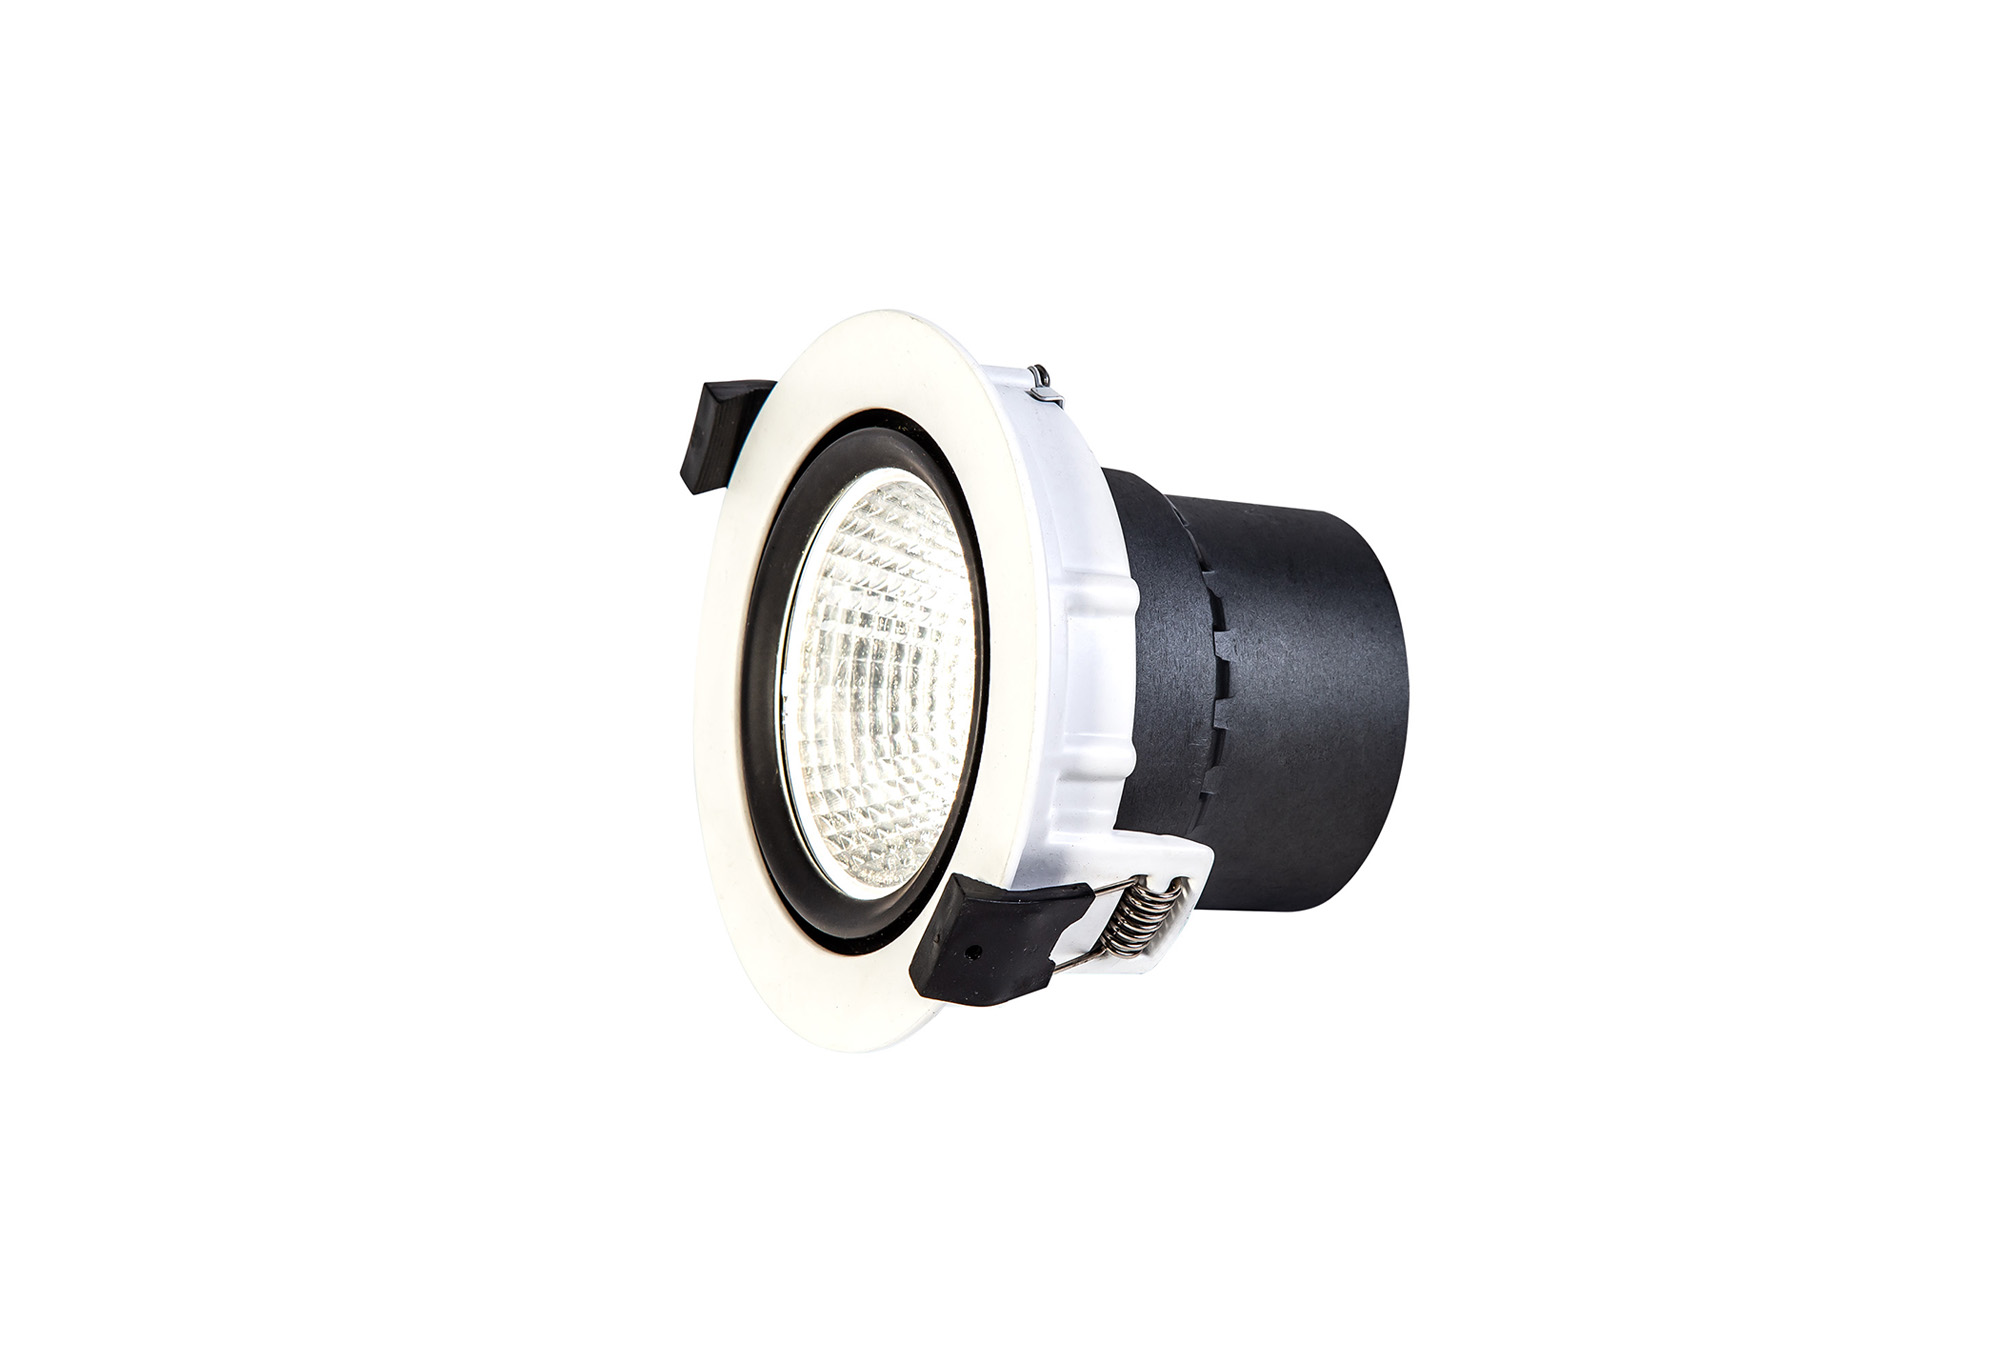 DM201204  Bamo 20, 20W, 450mA, White LED Round Downlight, Cut Out 103mm, 1480lm, 10°, 2700K Warm White, IP20, DRIVER NOT INCLUDED, 5yrs Warranty